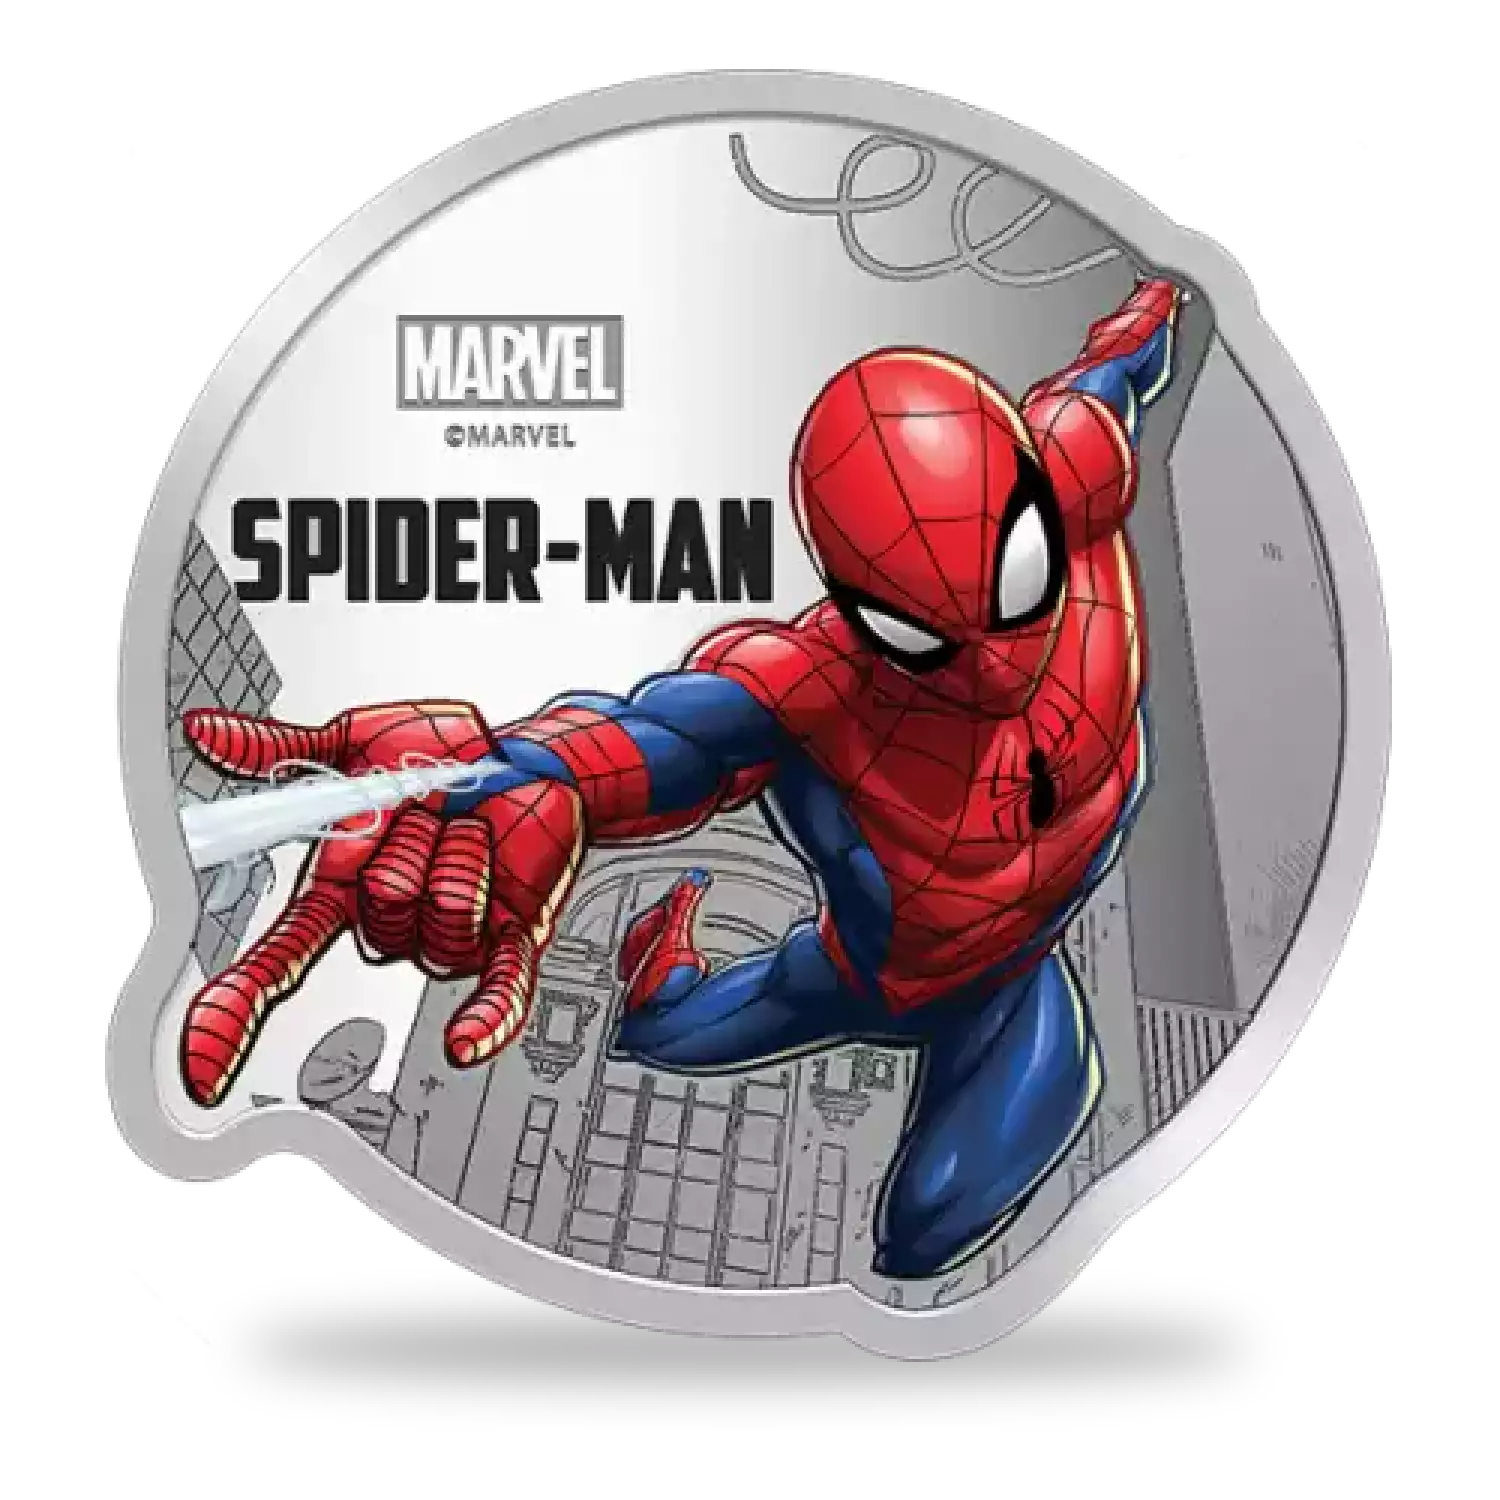 MMTC-PAMP Marvel Comics Spiderman 1oz Silver Coin